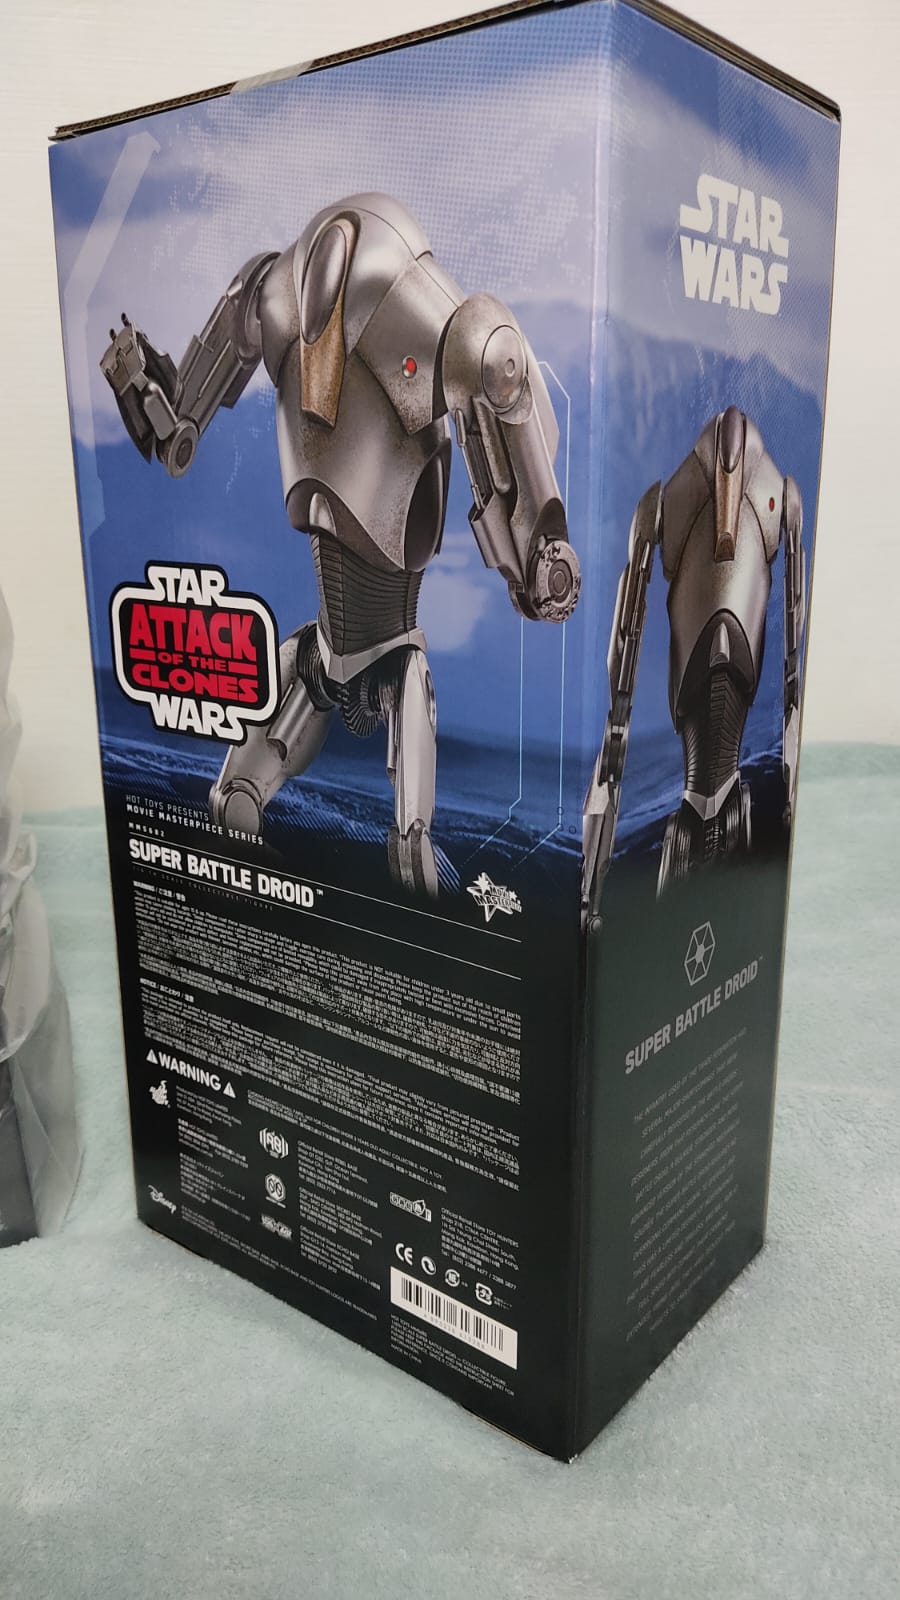 StarWars - NEW PRODUCT: HOT TOYS: STAR WARS EPISODE II: ATTACK OF THE CLONES™ SUPER BATTLE DROID™ 1/6TH SCALE COLLECTIBLE FIGURE Whats161